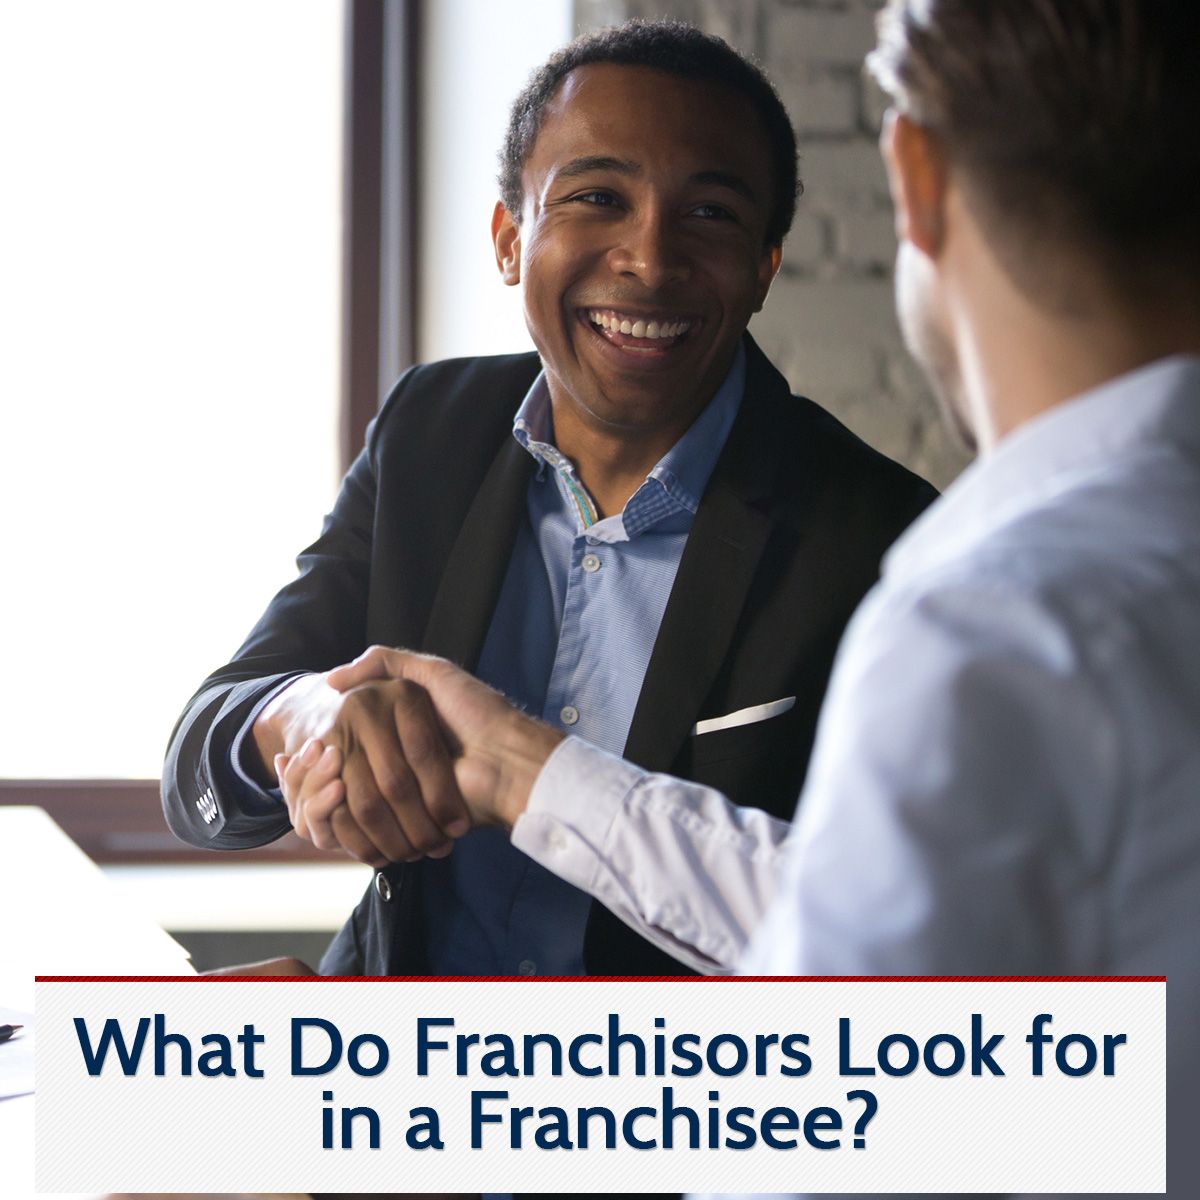 What Do Franchisors Look for in a Franchisee